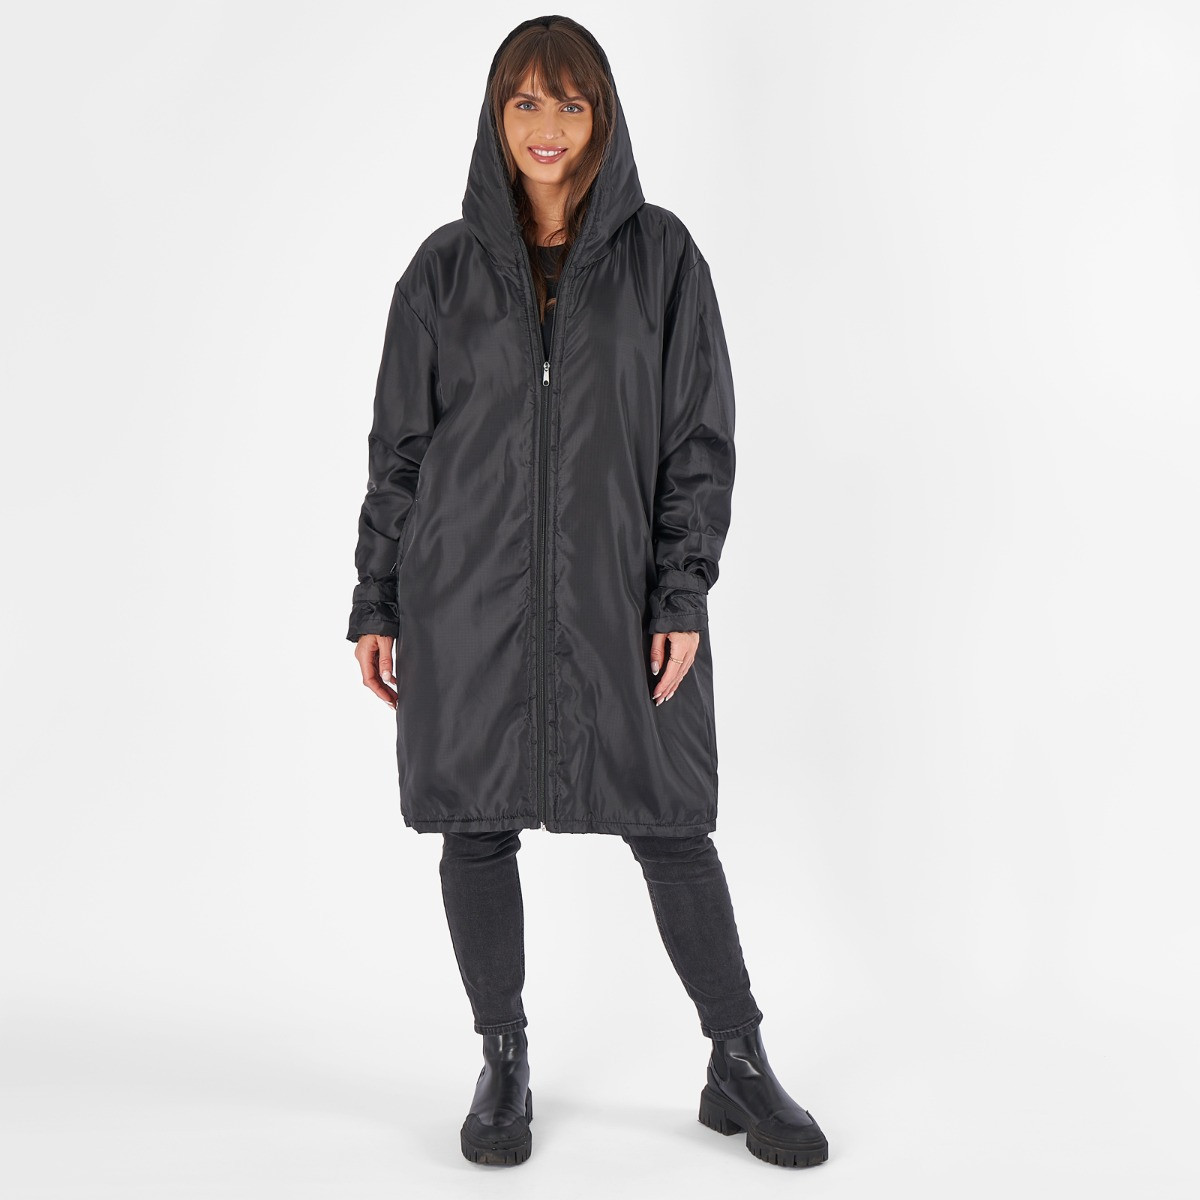 OHS Water Resistant Full Zip Changing Robe - Black>